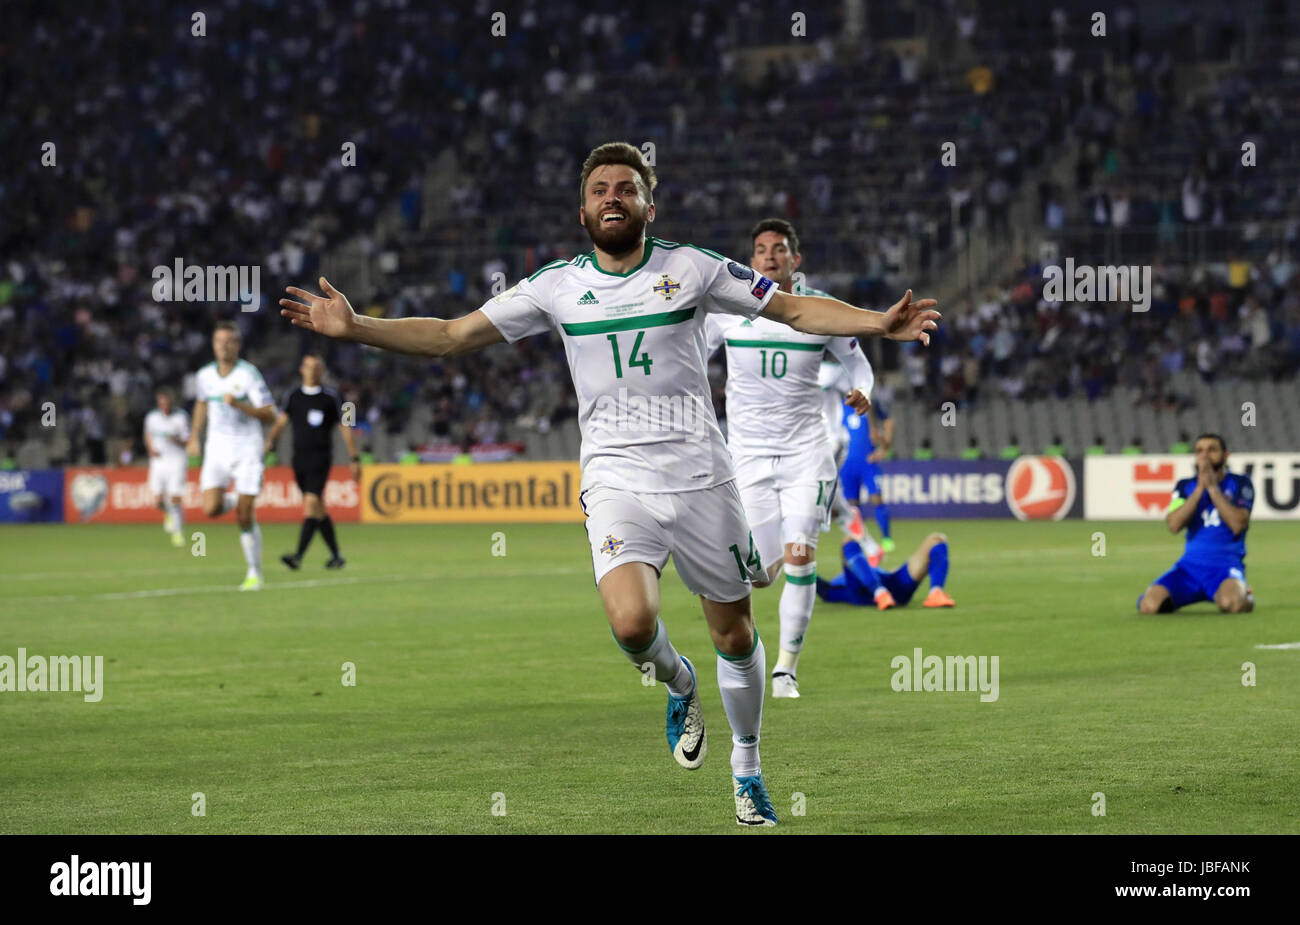 Northern Ireland's Stuart Dallas celebrates scoring his side's first goal of the game during the 2018 FIFA World Cup qualifying, Group C match at the Tofik Bakhramov Stadium, Baku. Stock Photo